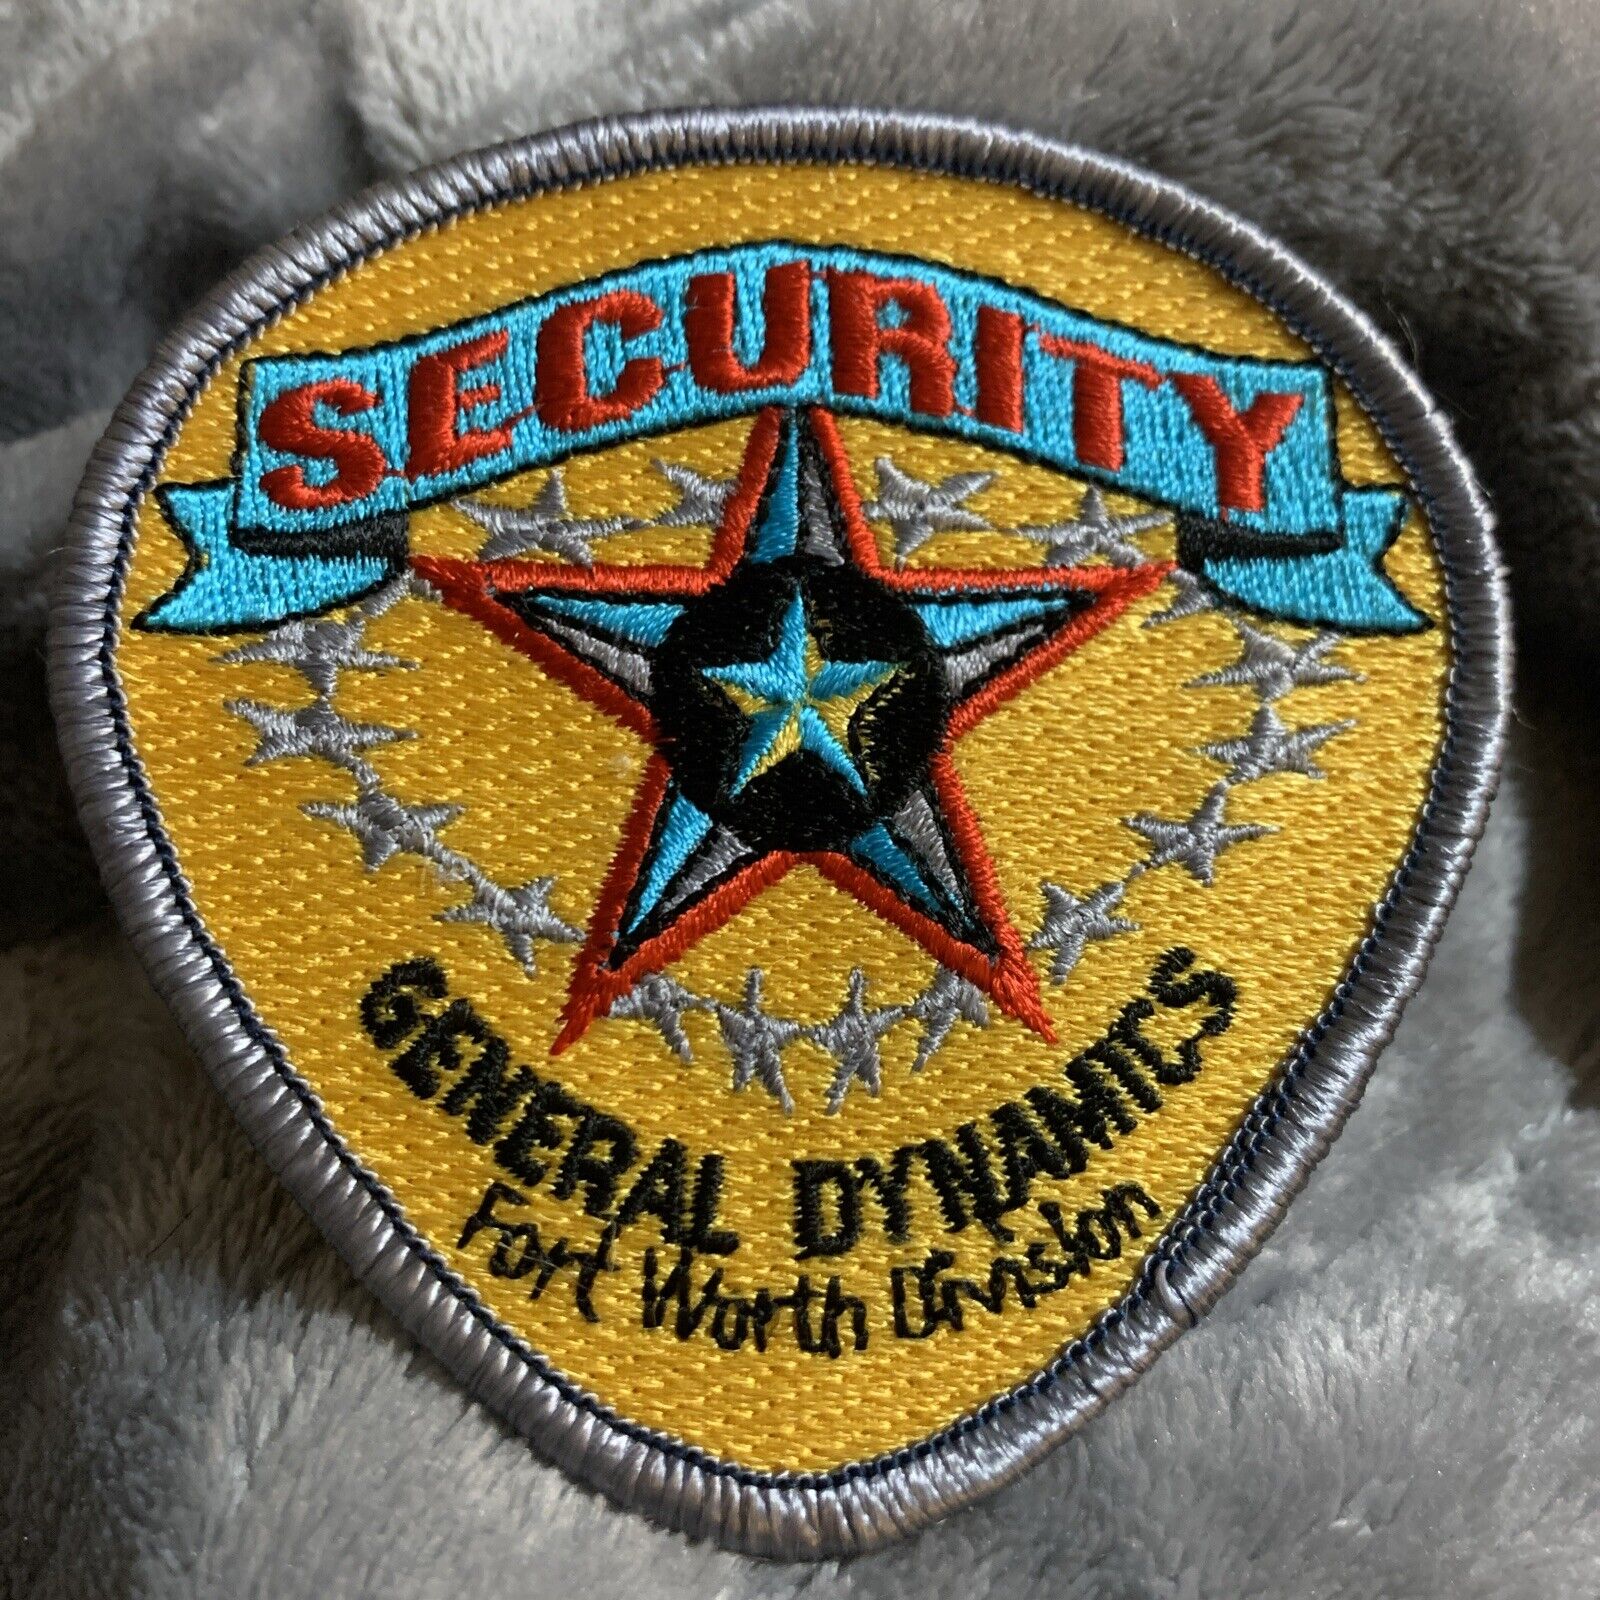 VINTAGE GENERAL DYNAMICS SECURITY PATCH FT WORTH TEXAS DIVISION-gold Background